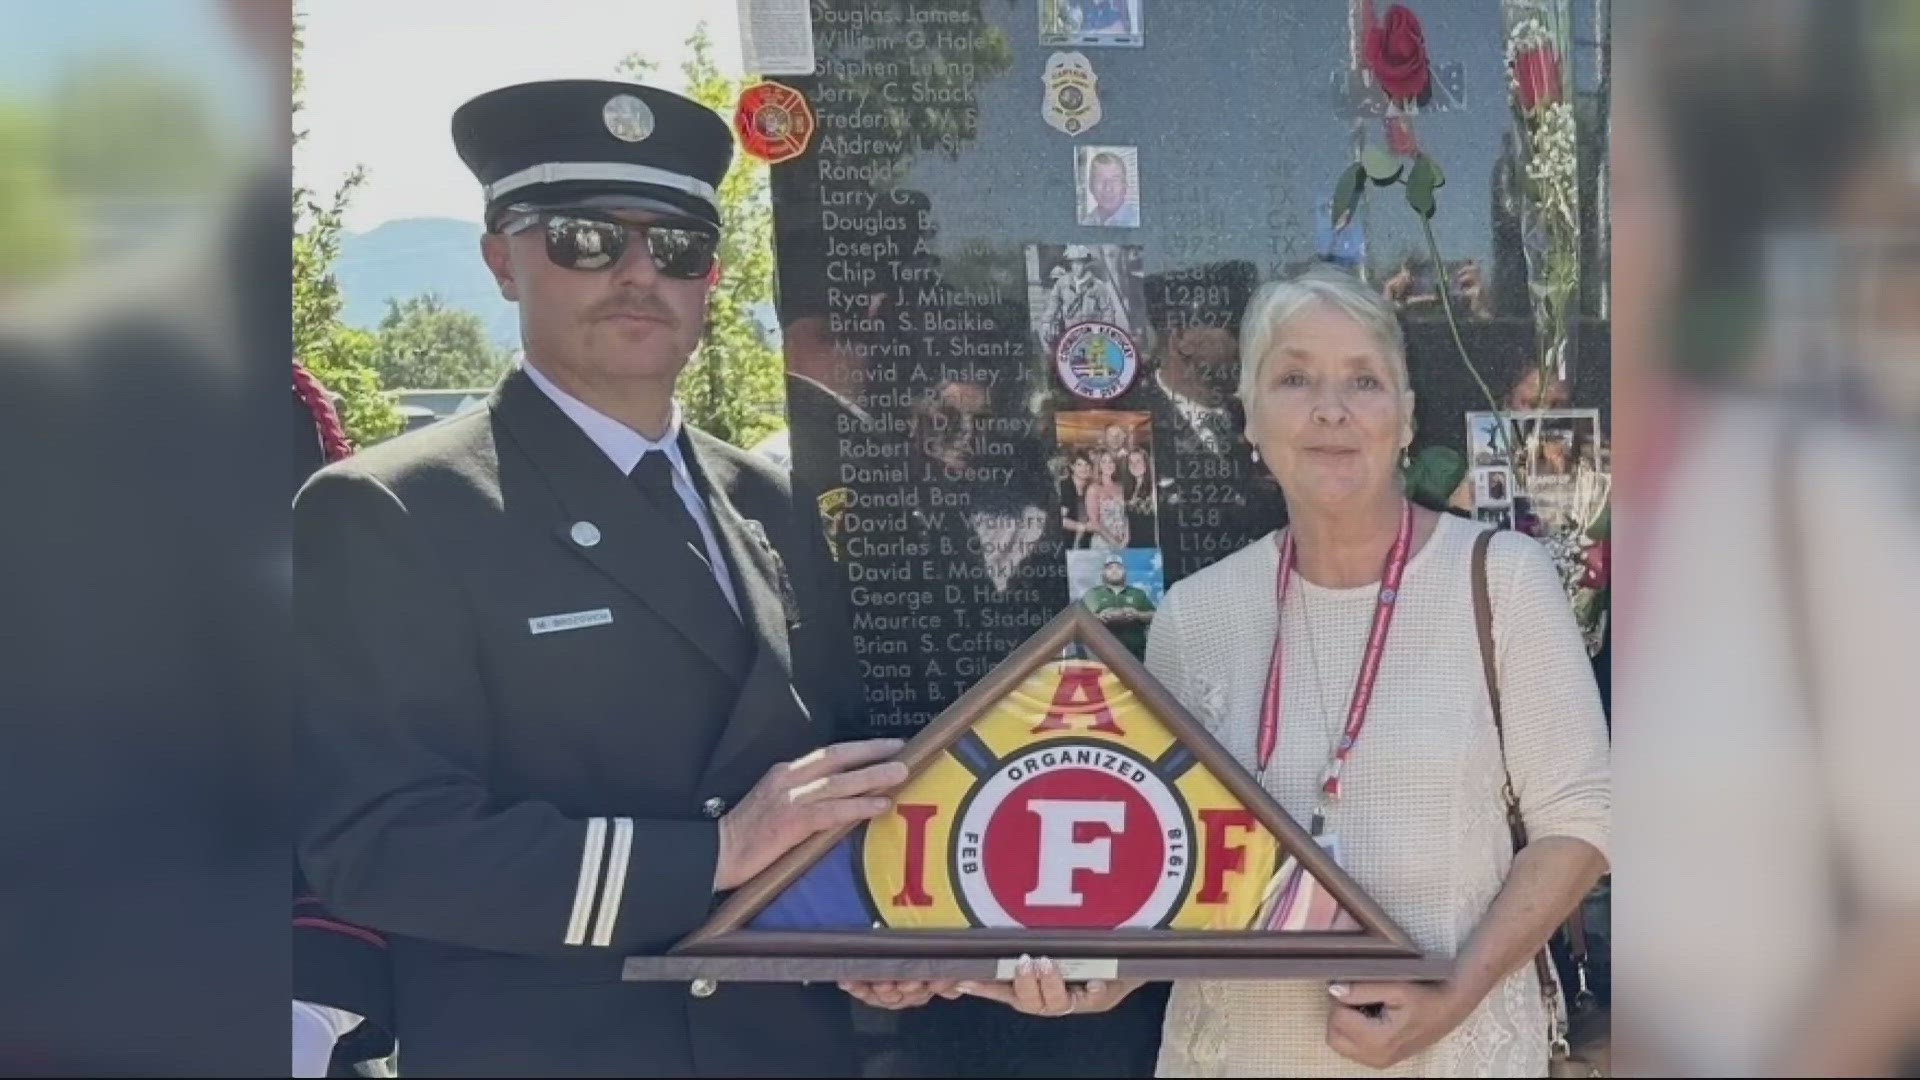 The widow of the firefighter that passed due to cancer was initially given the benefits, due to the chance that the origin of his cancer was connected to his work